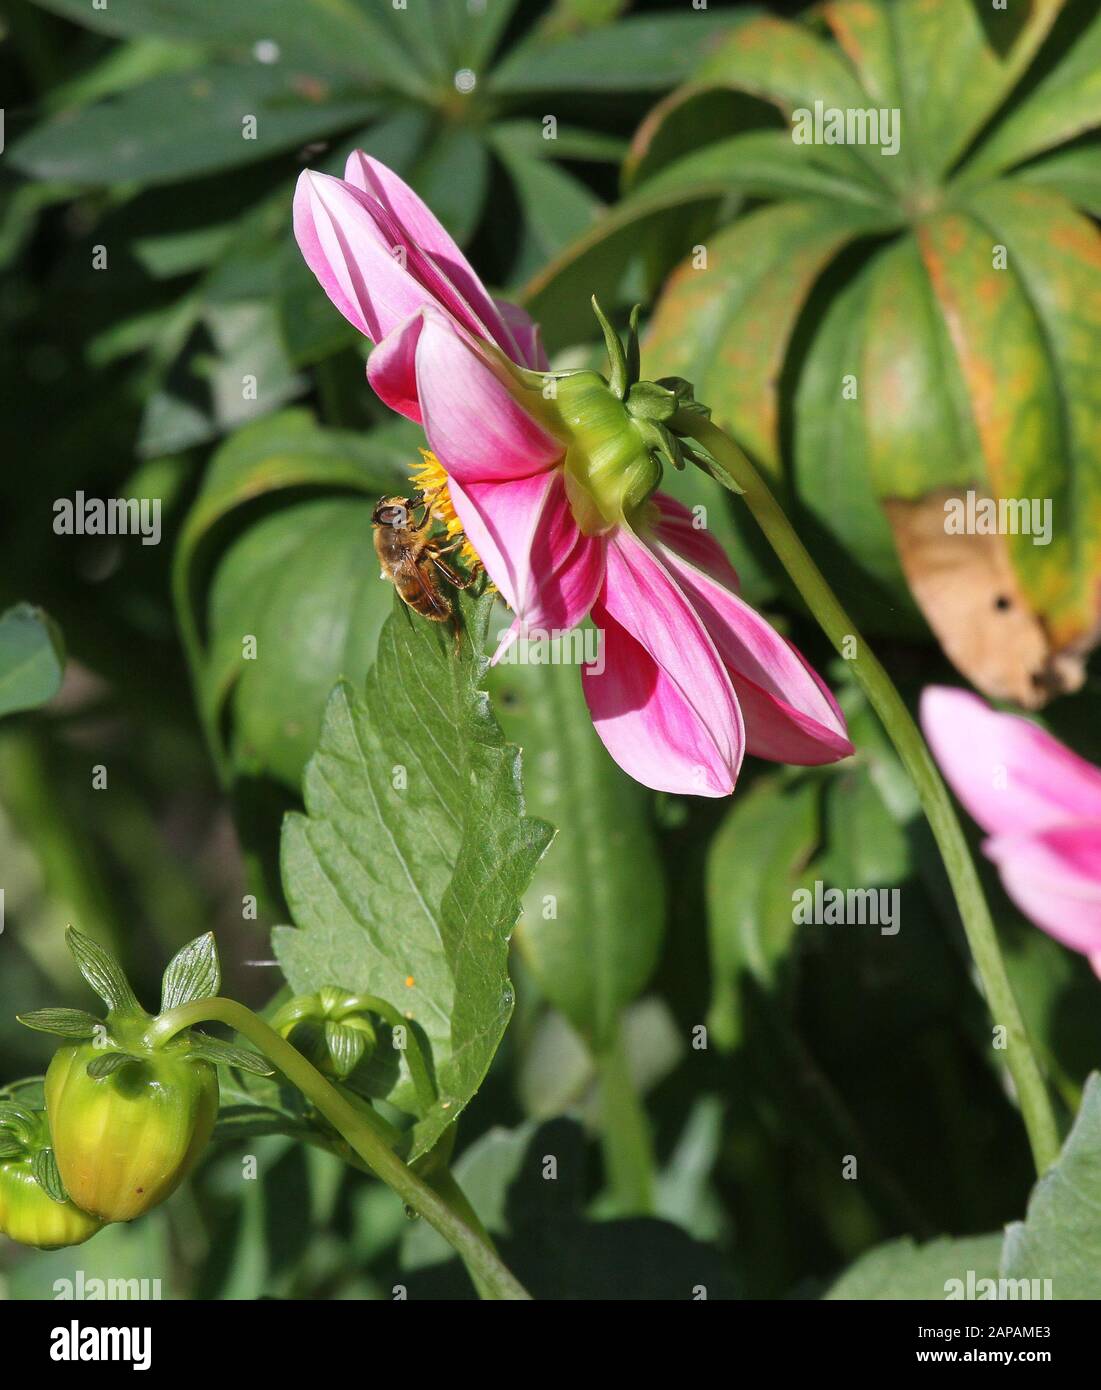 UK garden insect on pink dahlia head on sunny summer day with green foliage in background. Stock Photo